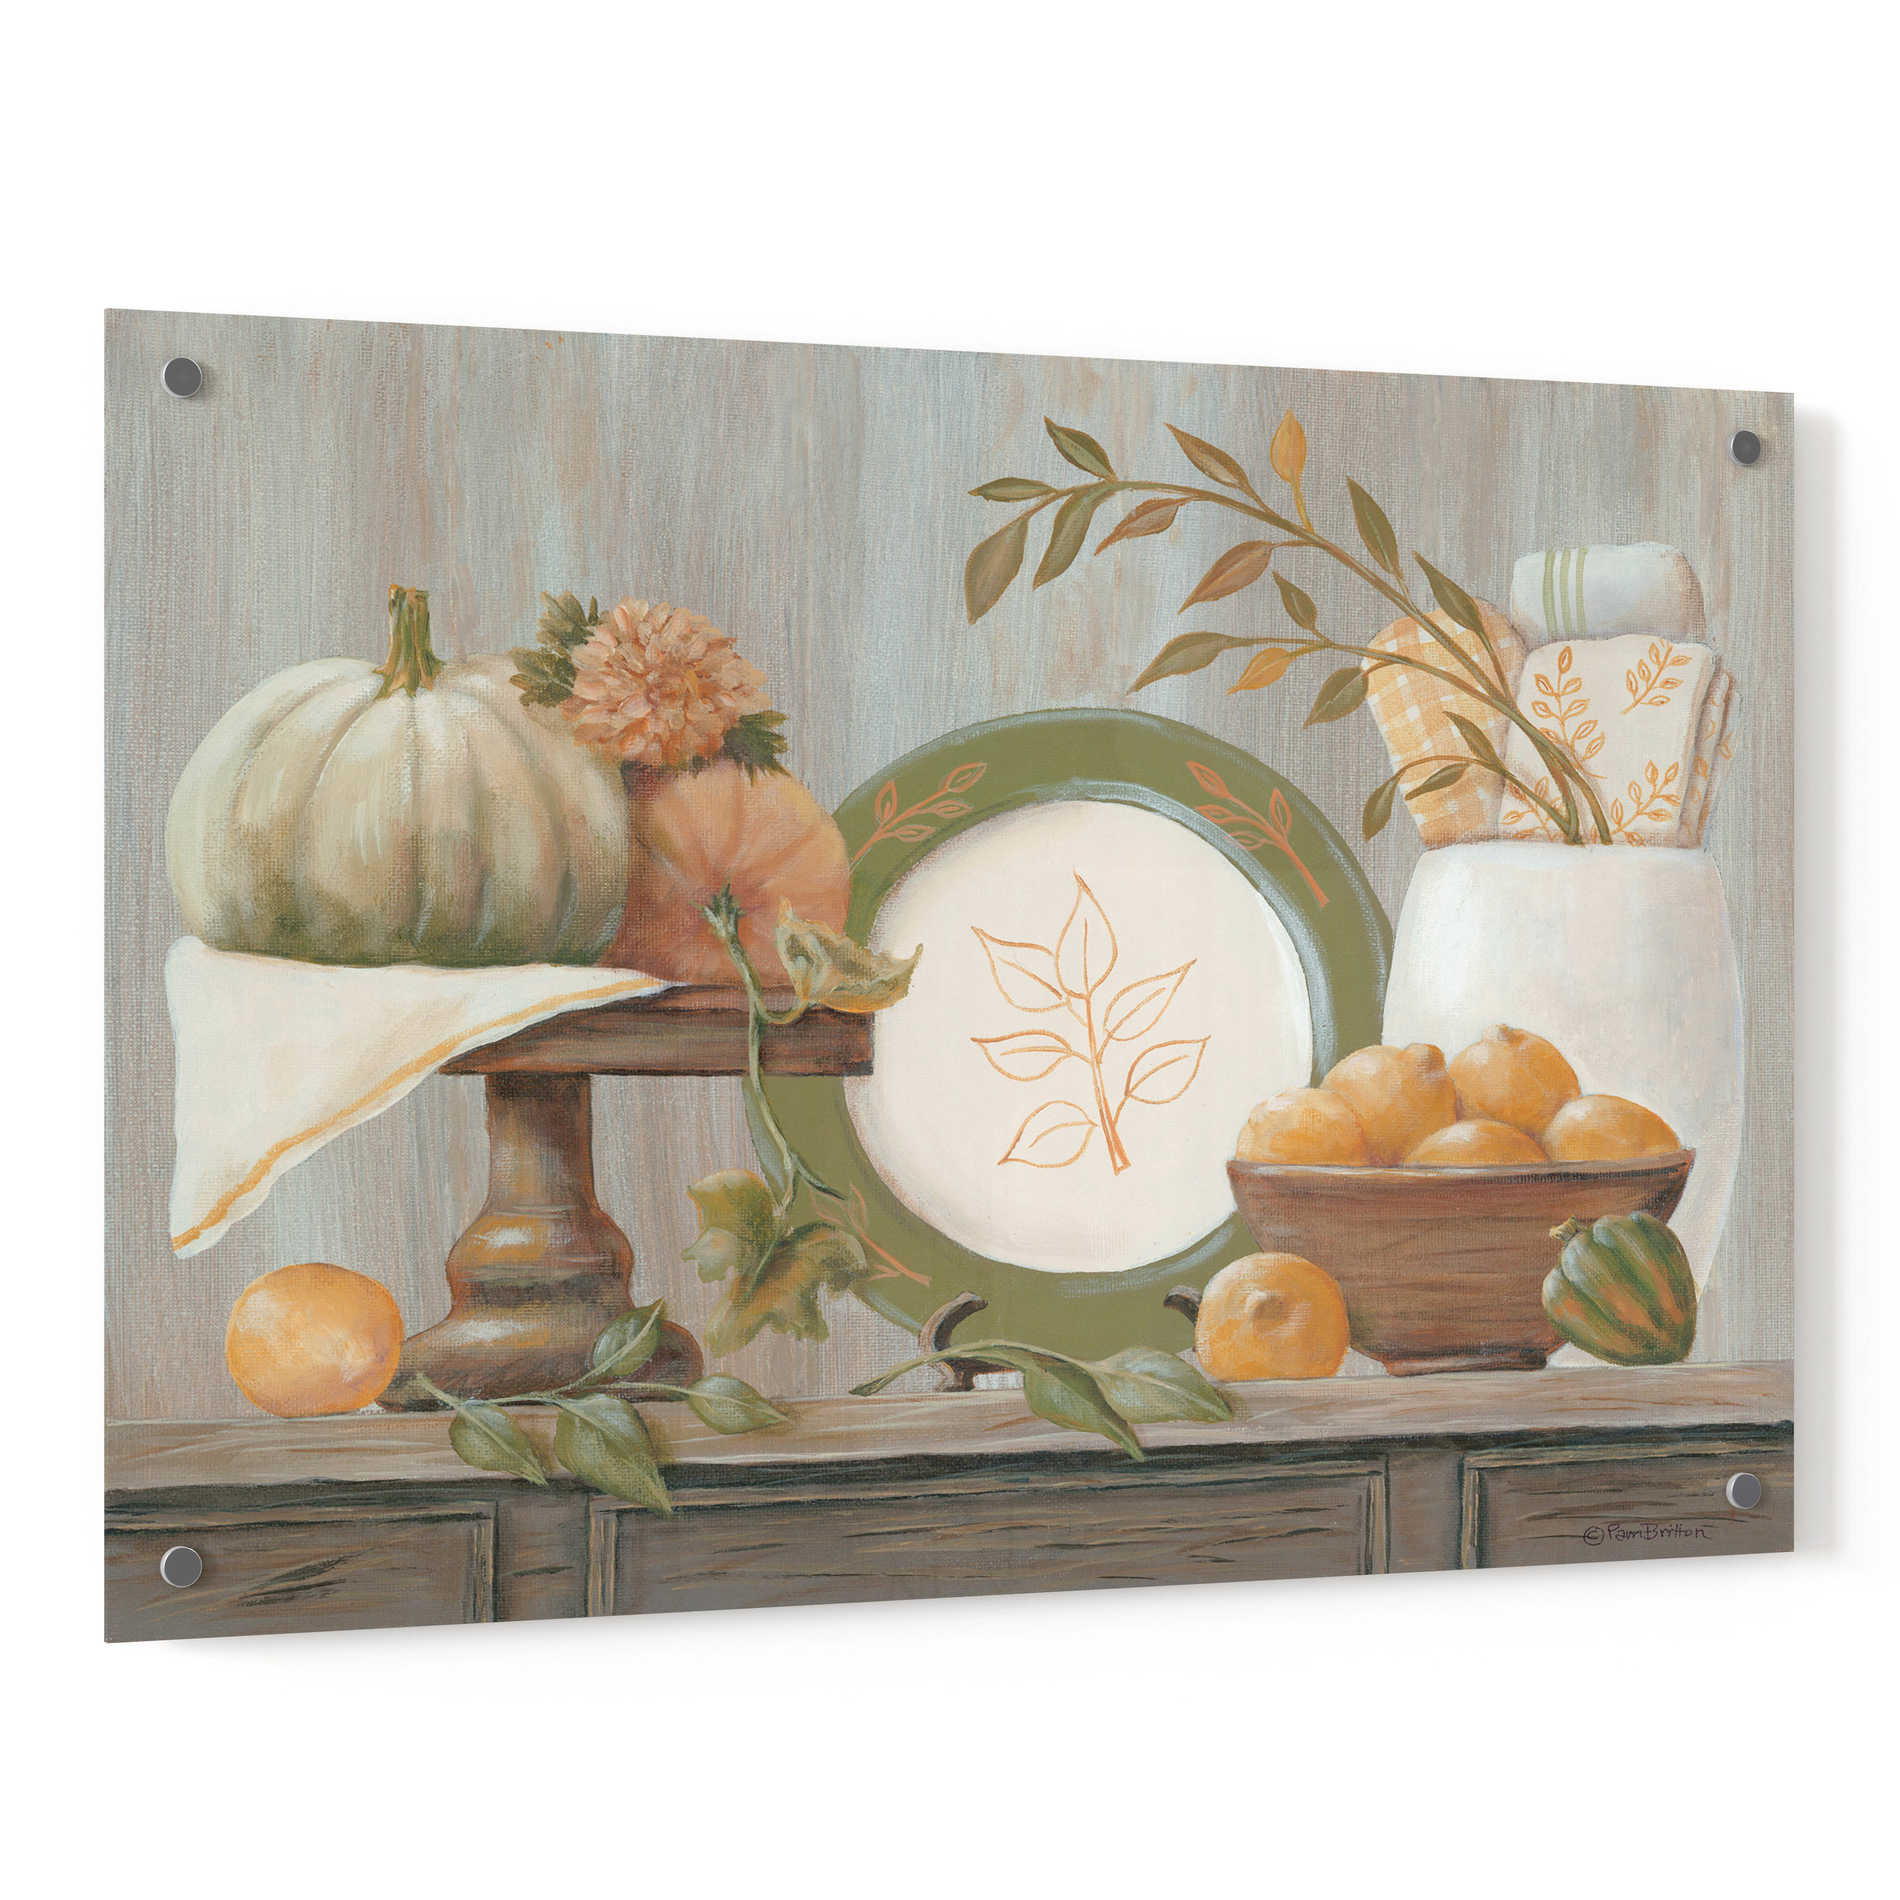 Epic Art 'A Harvest Kitchen' by Pam Britton, Acrylic Glass Wall Art,36x24